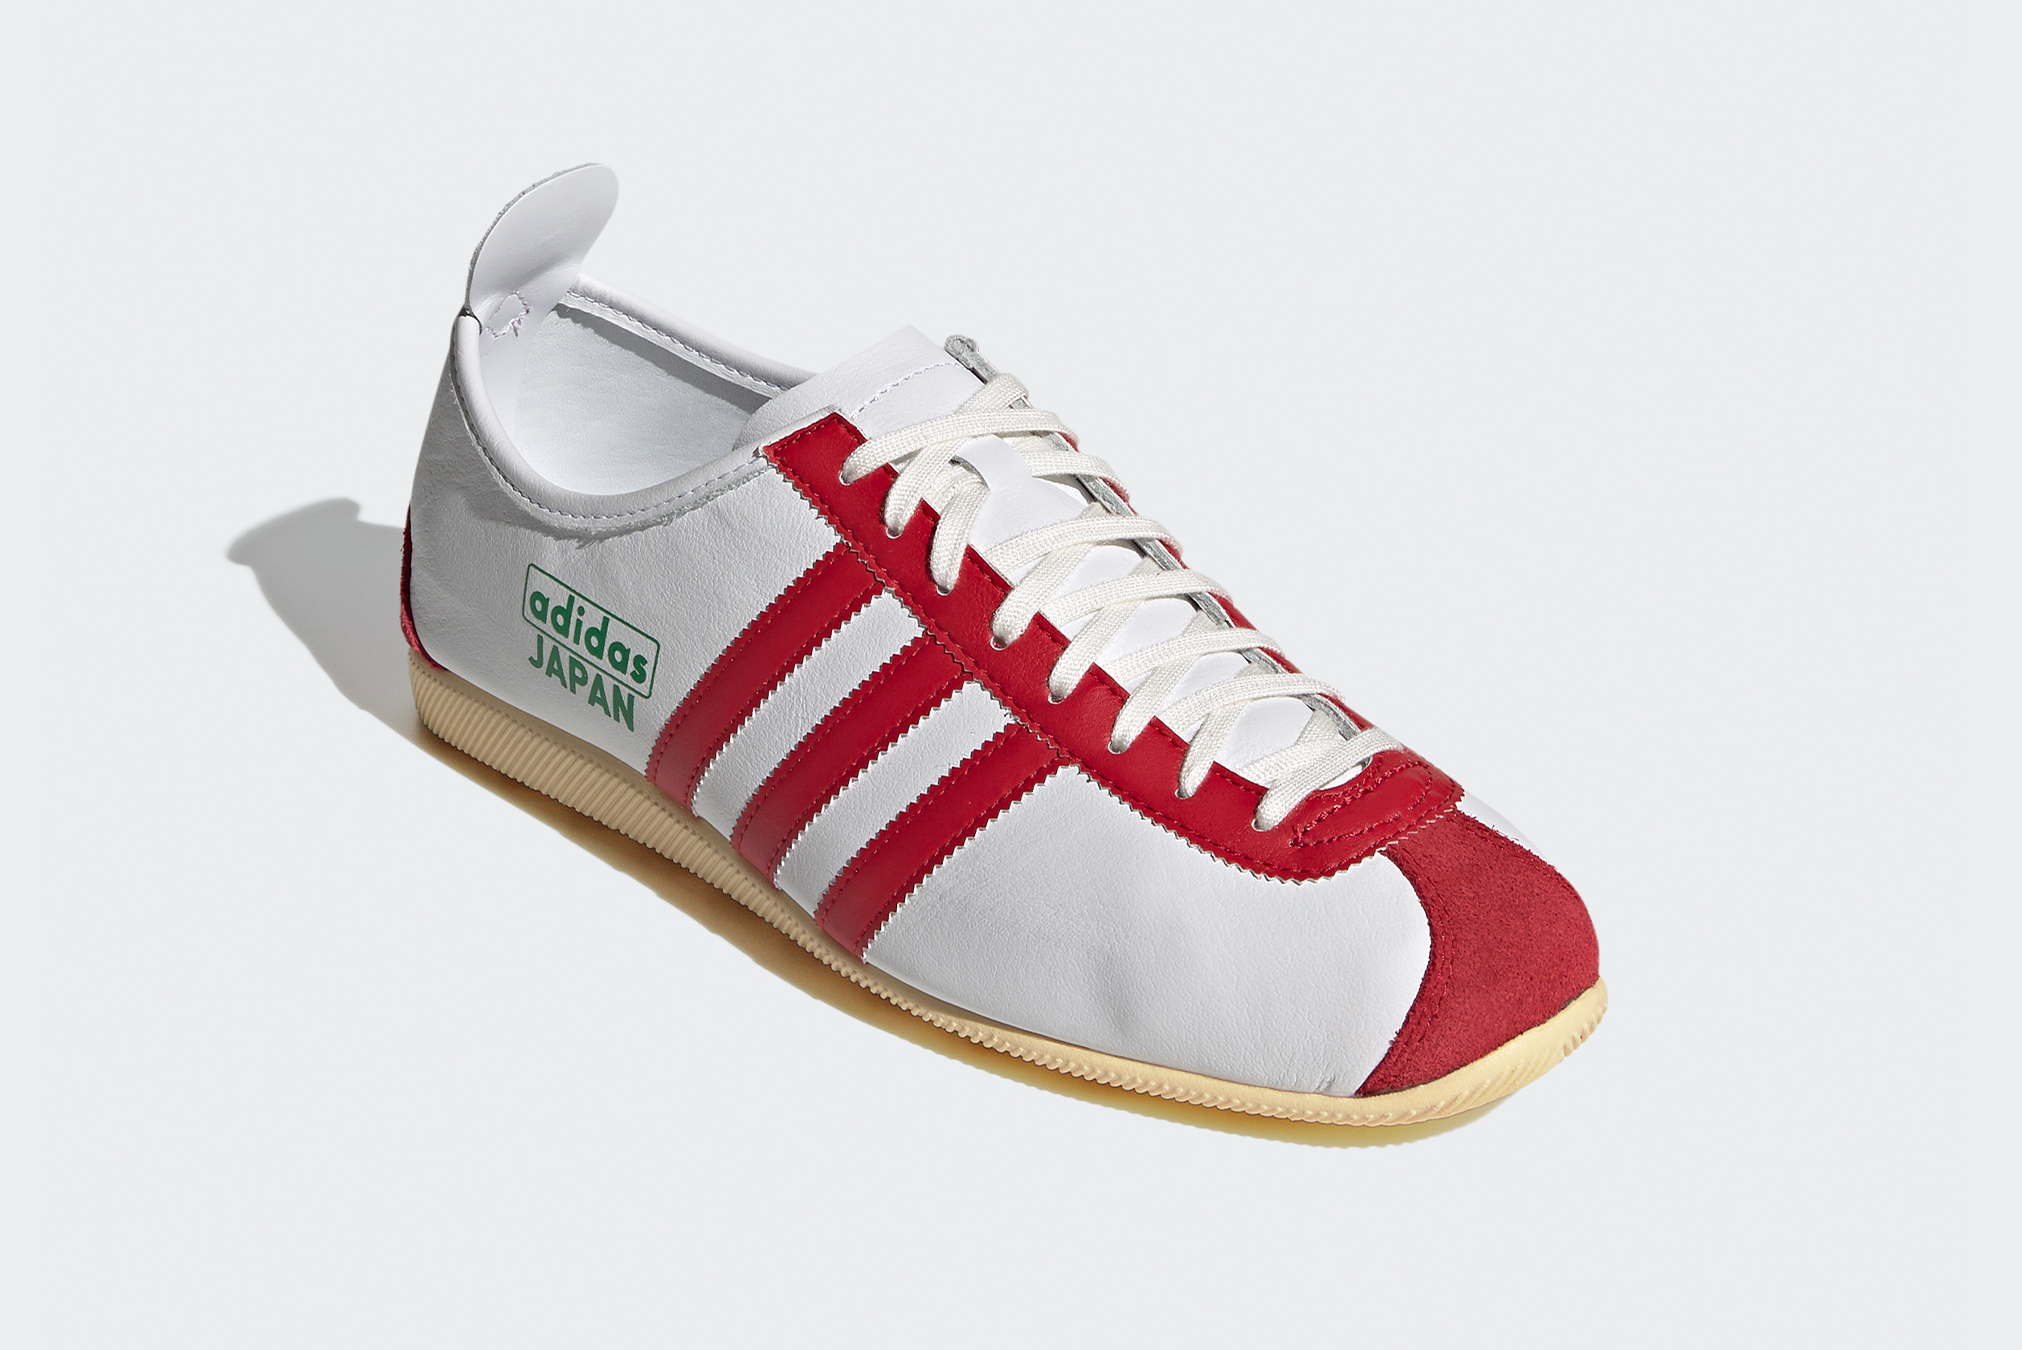 END. Features | adidas Japan - Register 